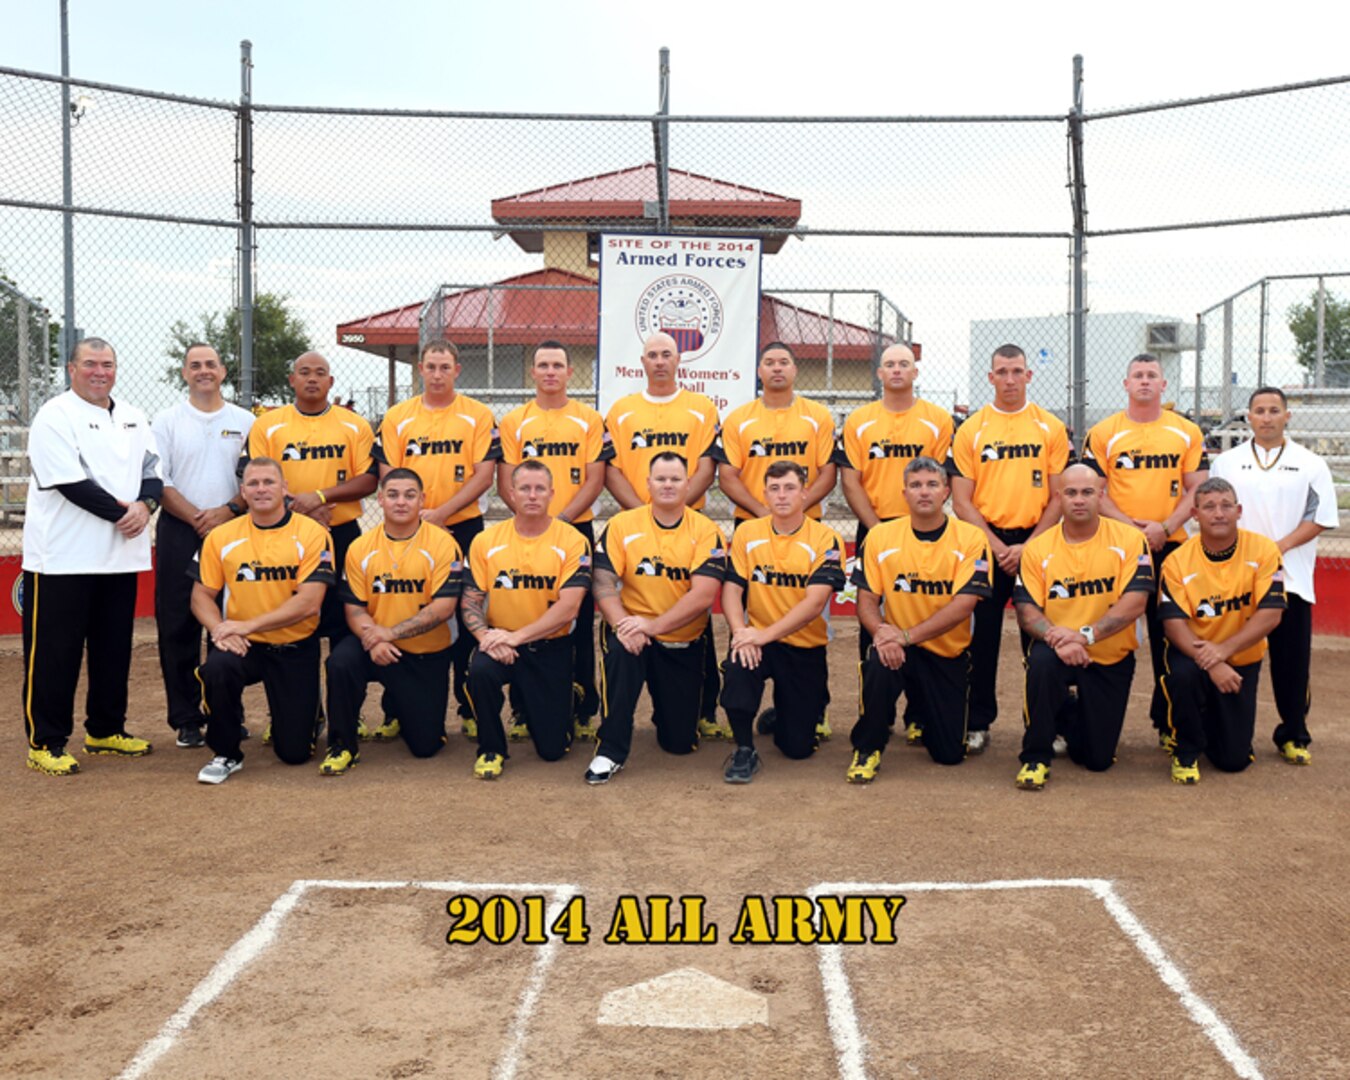 All Army Mens Softball team at the 2014 Armed Forces Softball Championship at Fort Sill, Okla. 14-19 September.